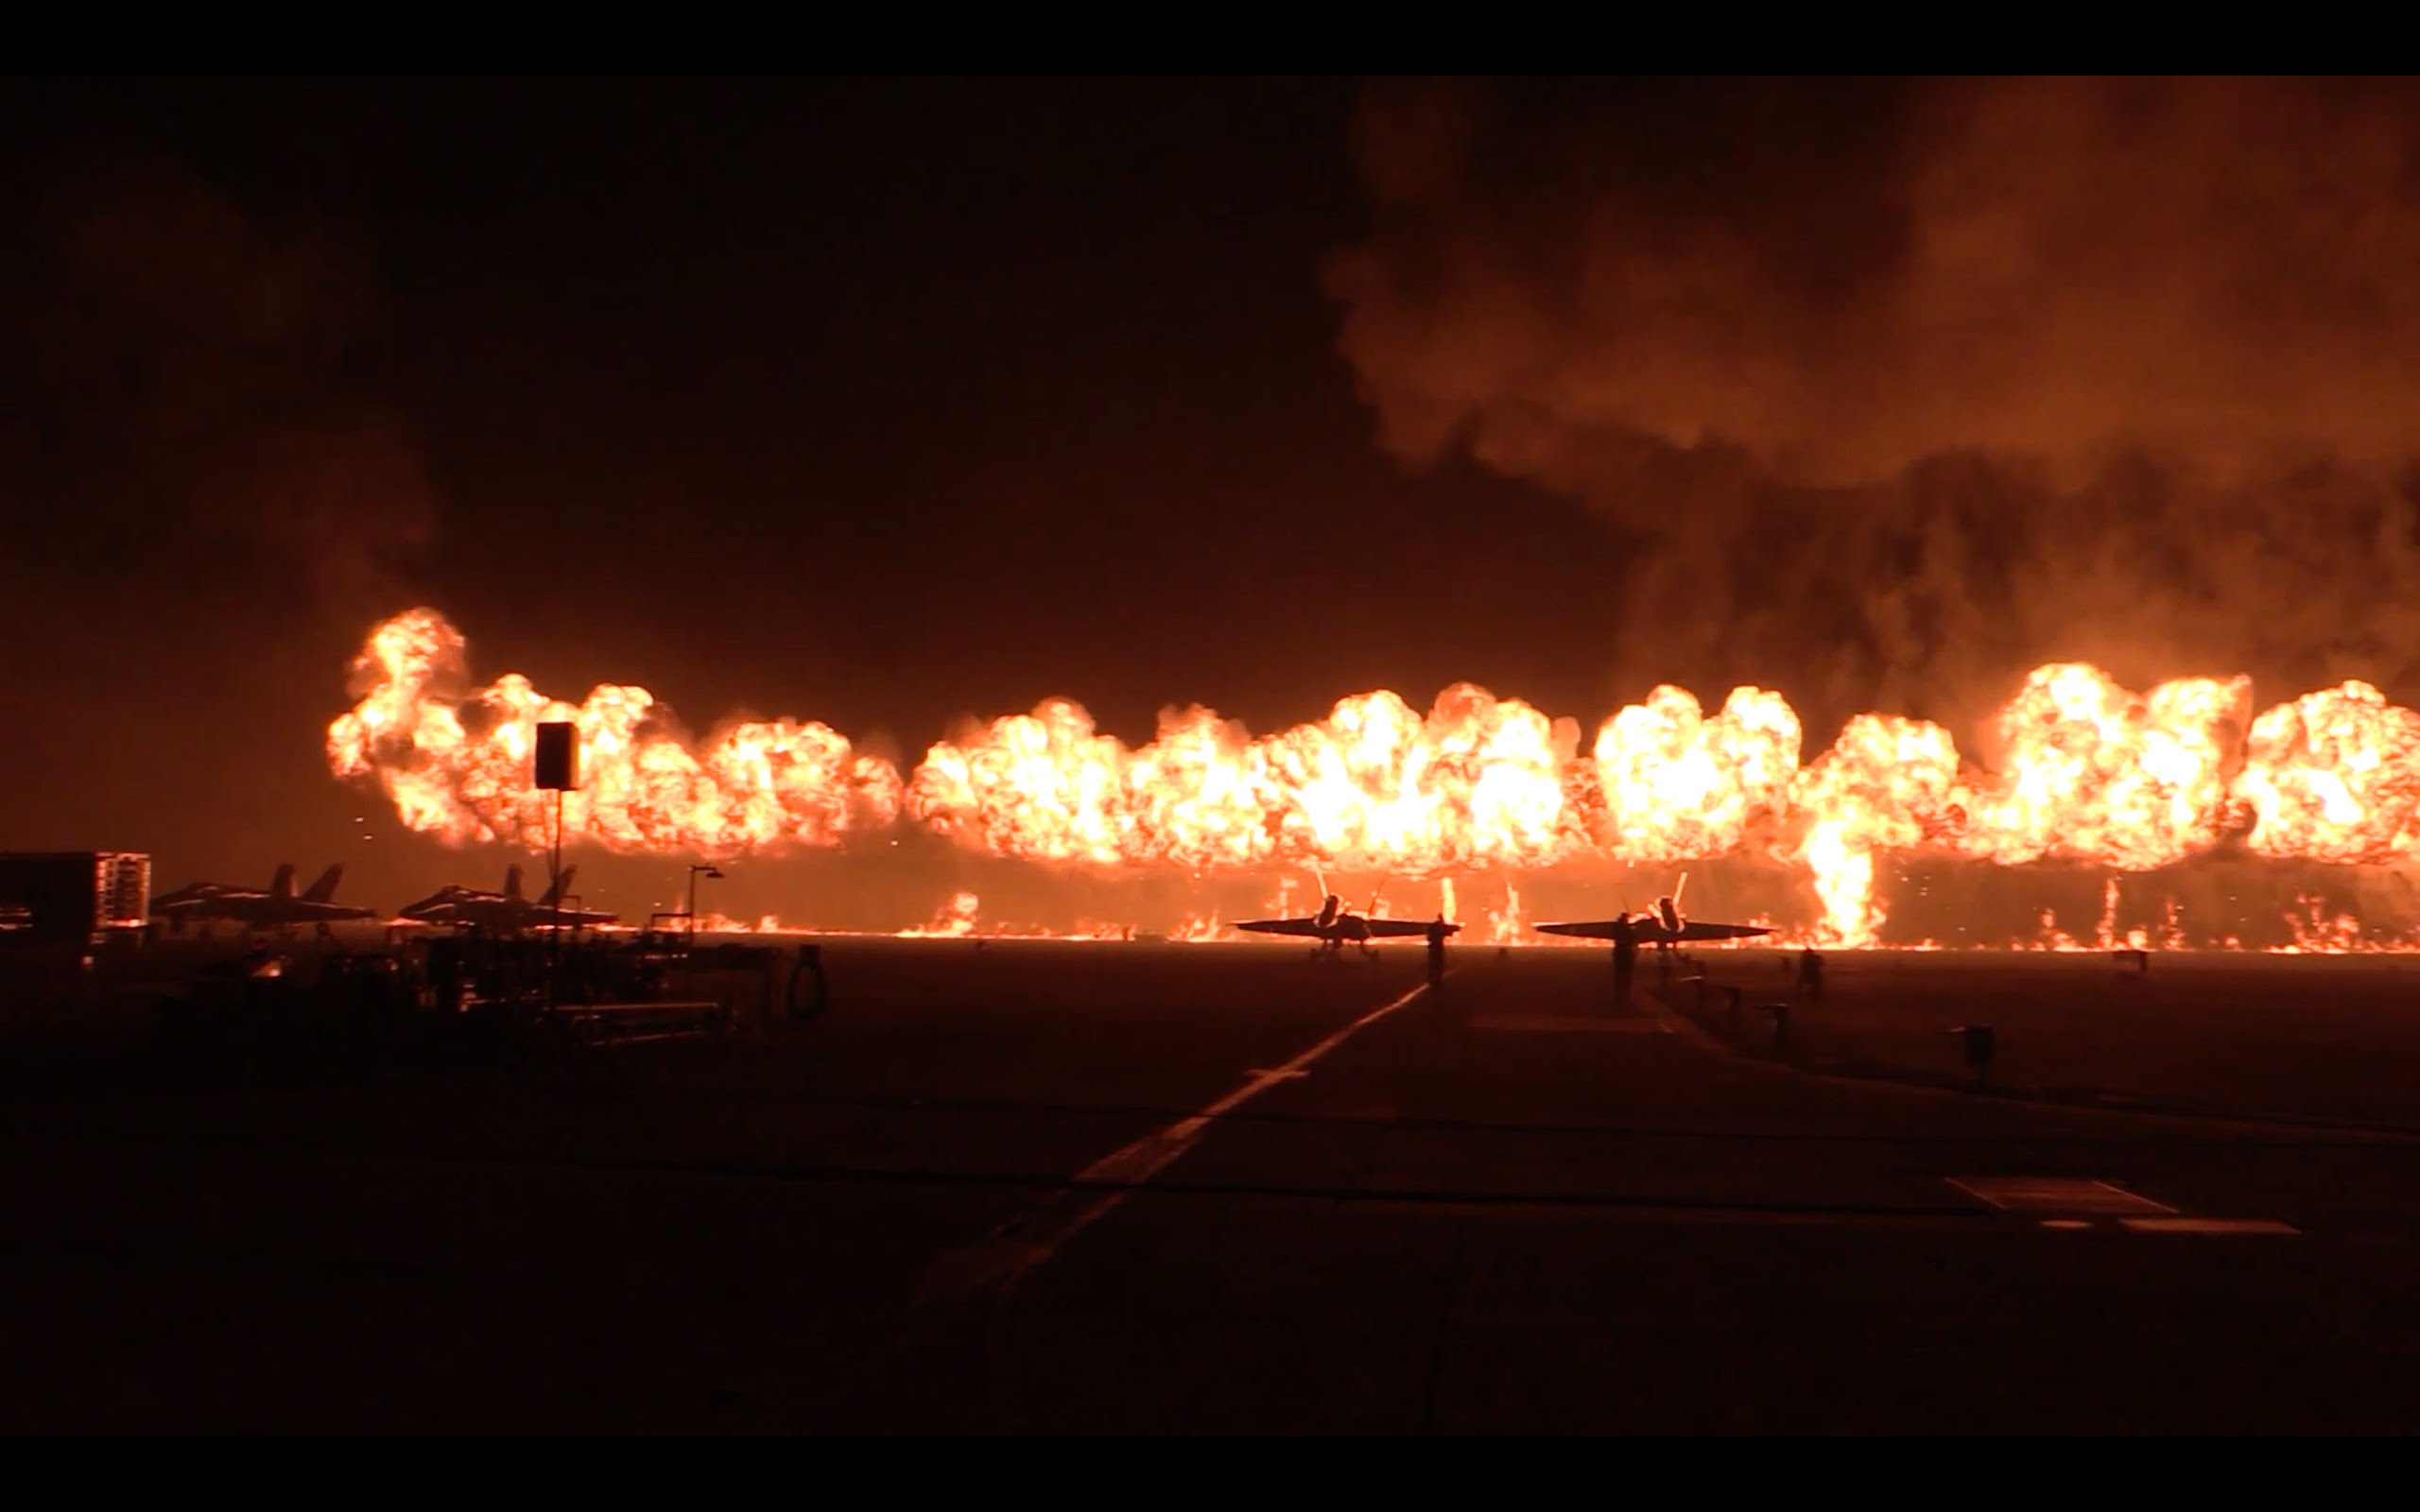 MCAS Miramar Airshow 2014 Finale - Wall of Fire! - YouTube